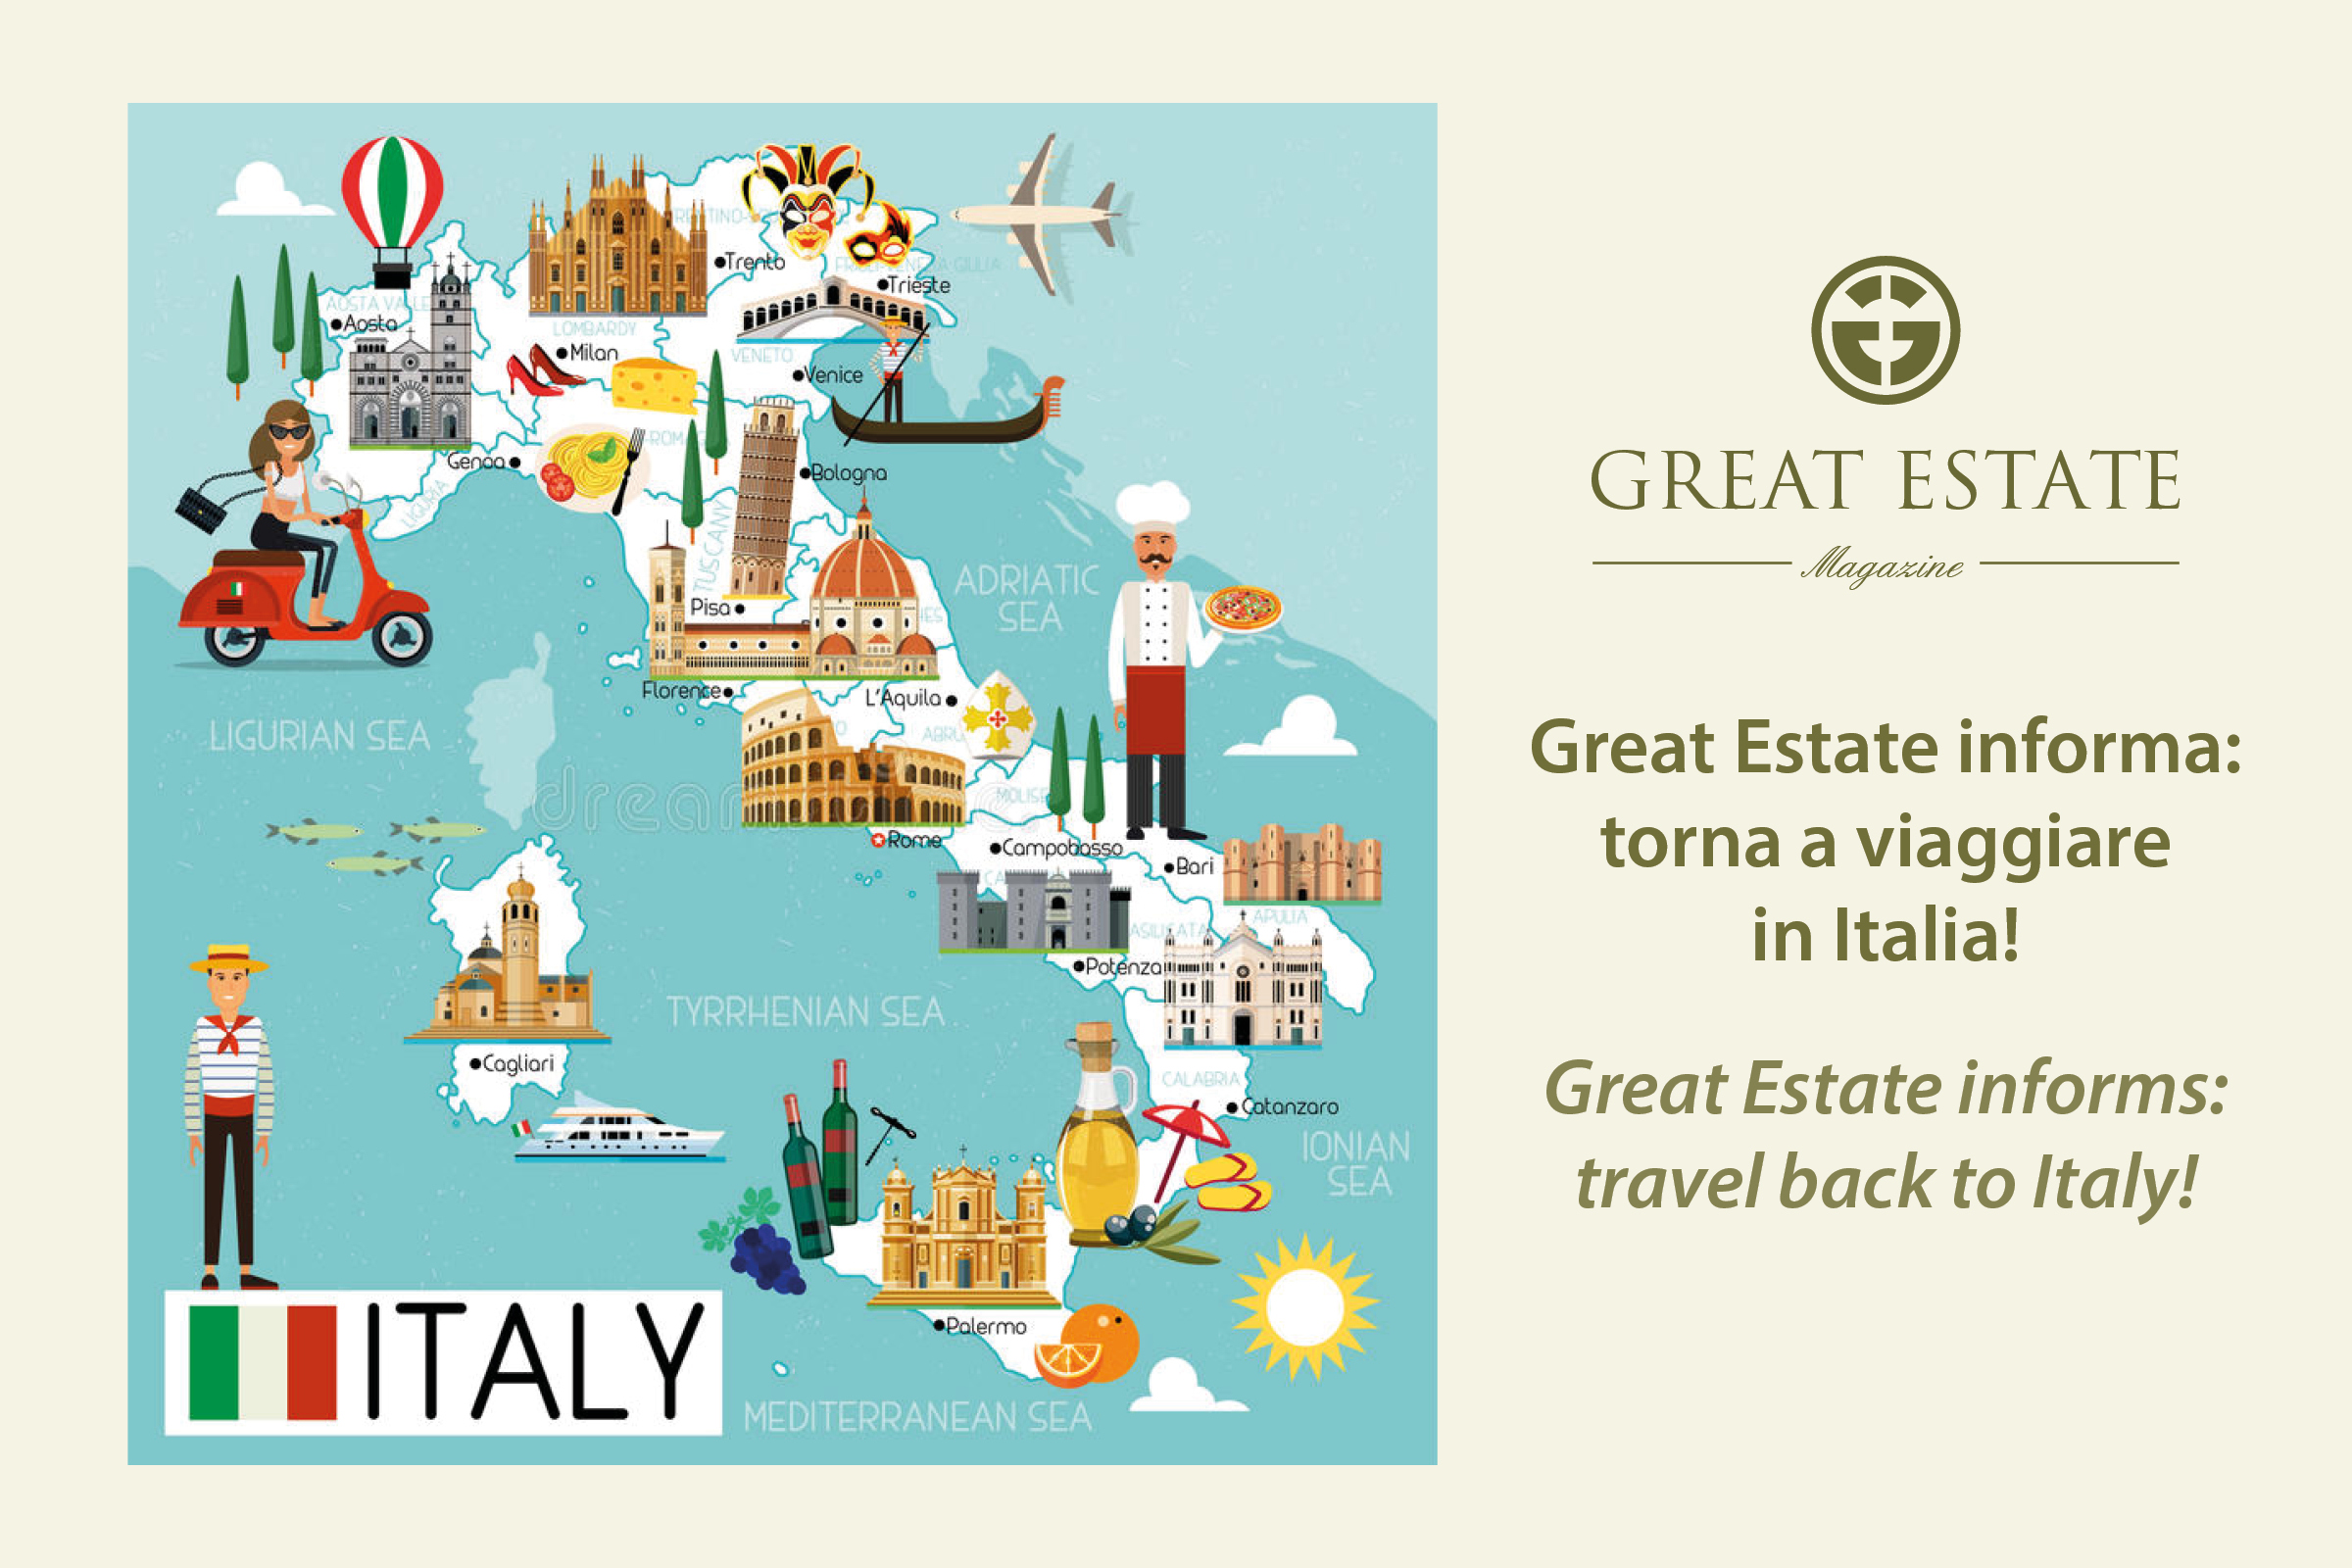 Back to traveling in Italy? From 16 May you can!